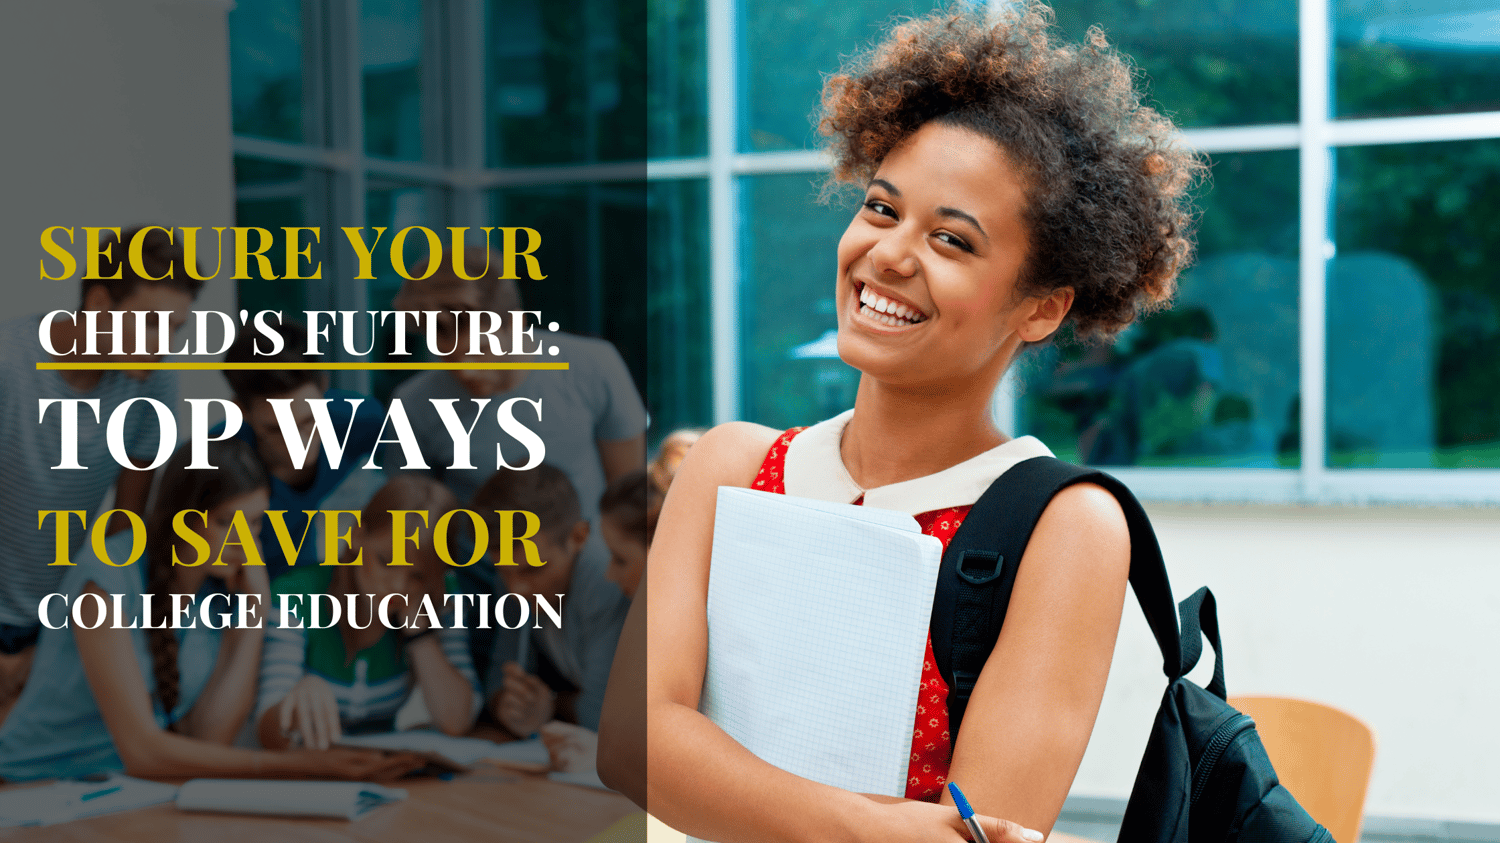 SECURE YOUR CHILD'S FUTURE: TOP WAYS TO SAVE FOR COLLEGE EDUCATION